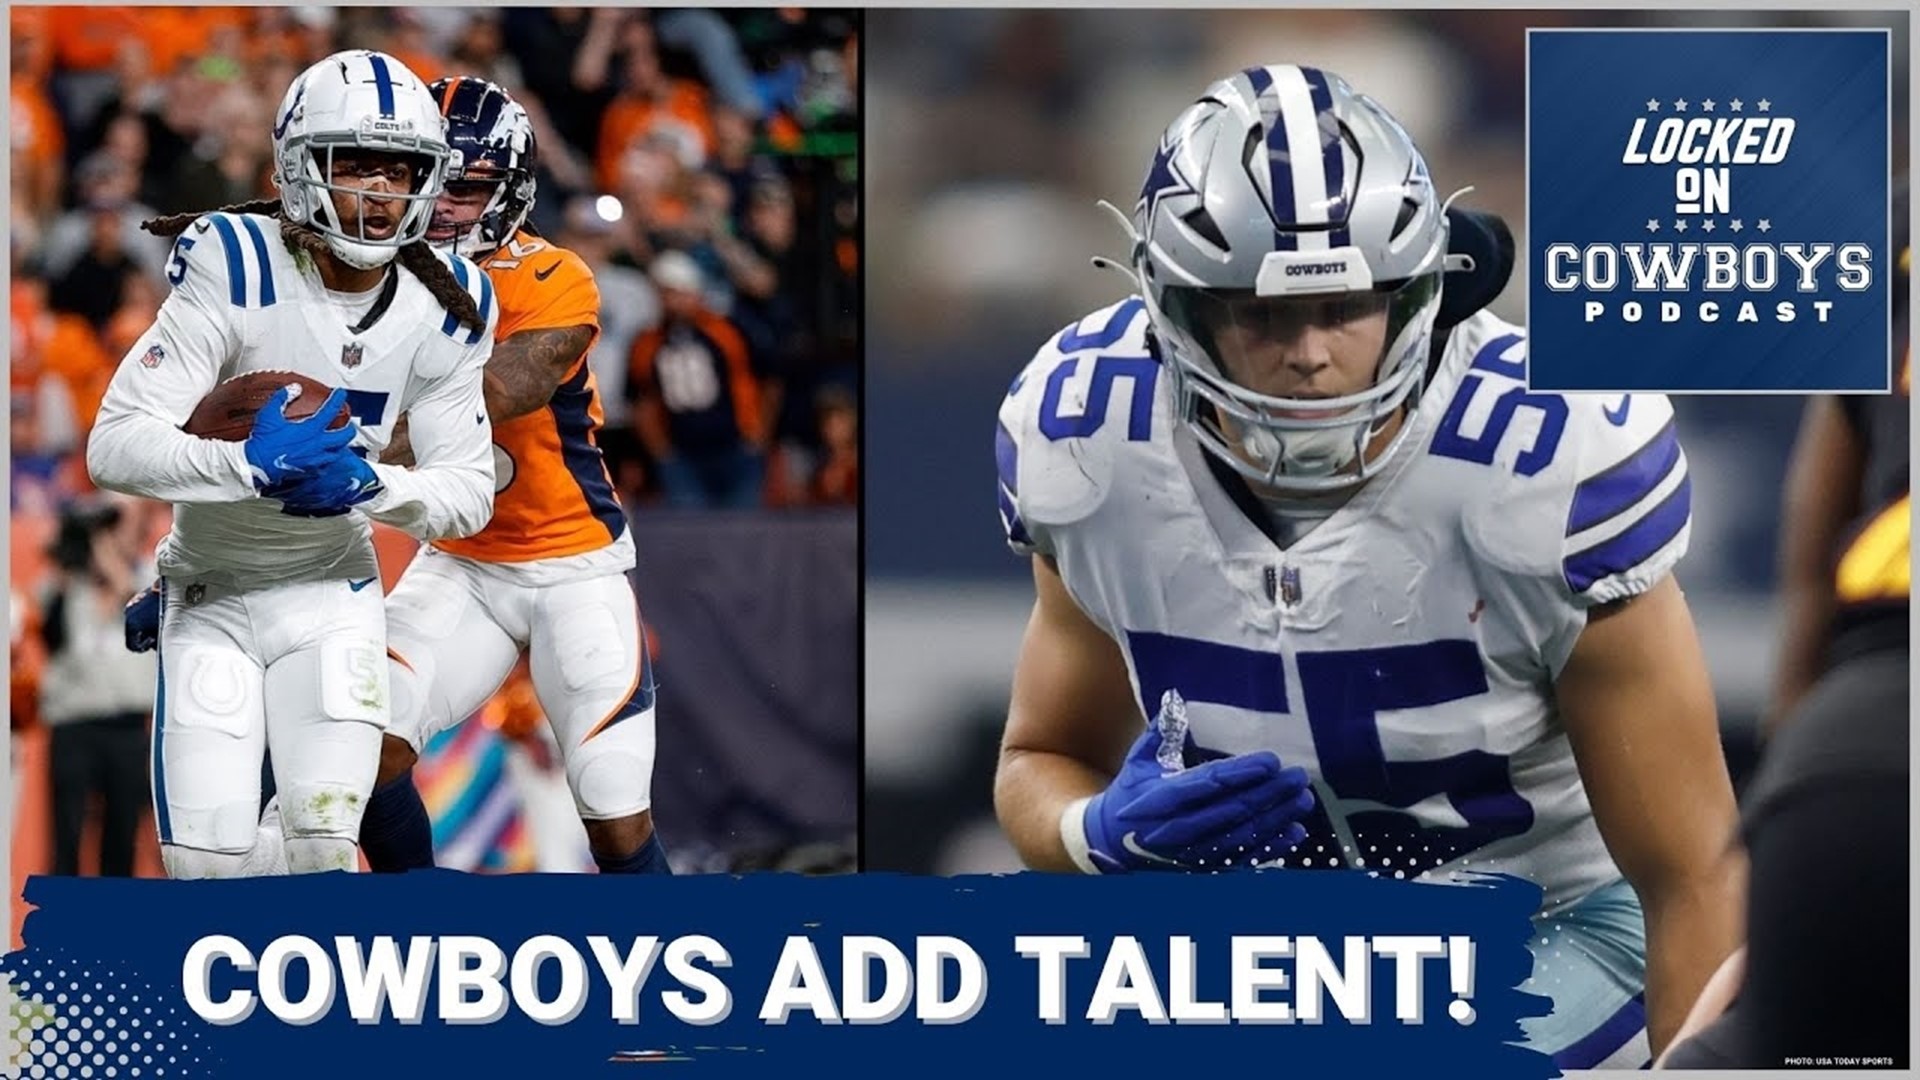 Marcus Mosher and Landon McCool discuss the Dallas Cowboys trading for All-Pro cornerback Stephon Gilmore and re-signing Leighton Vander Esch.